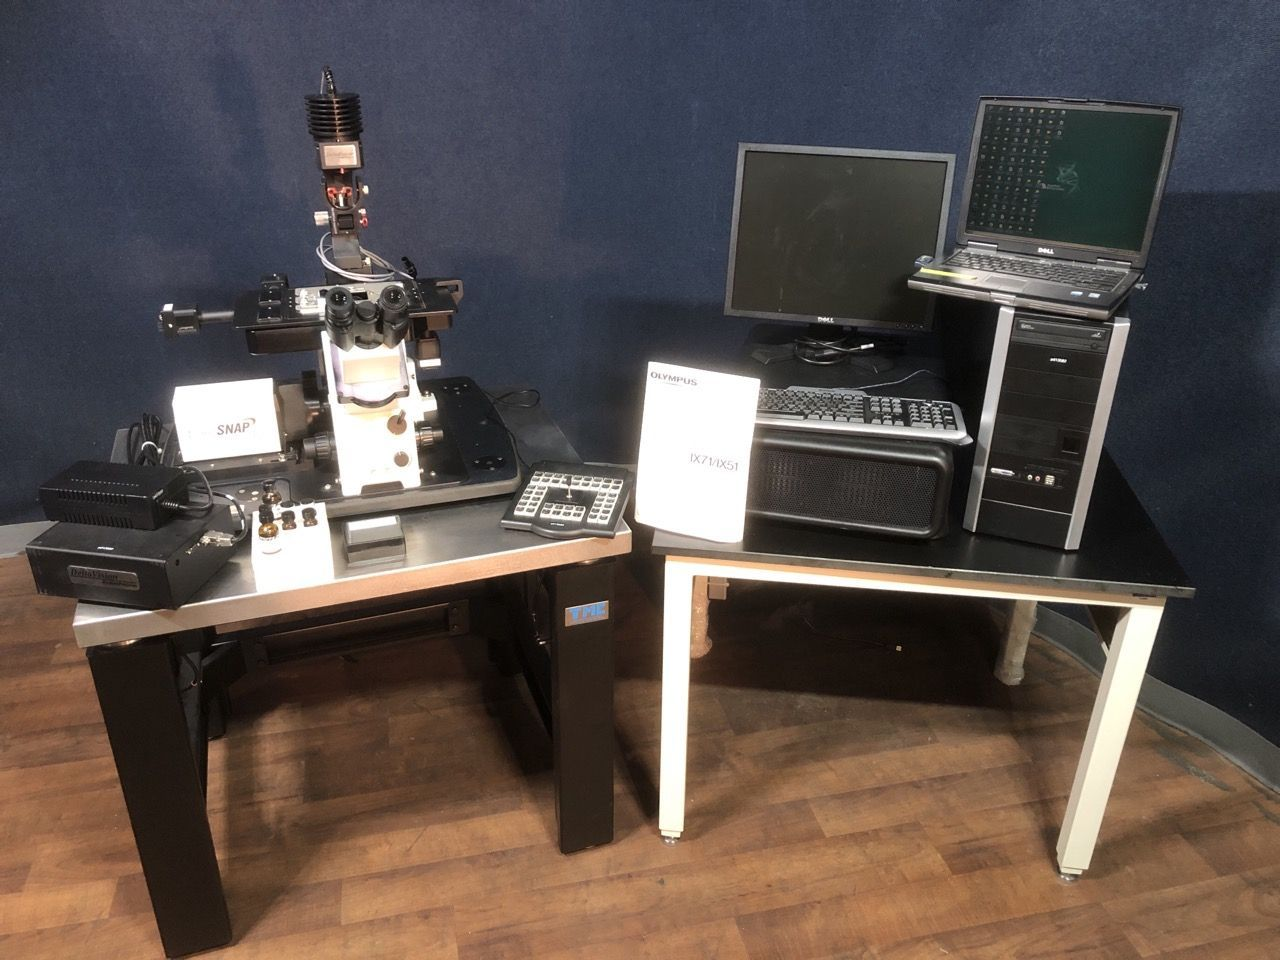 Olympus/AppliedPrecision IX71 Inverted Research Microscope